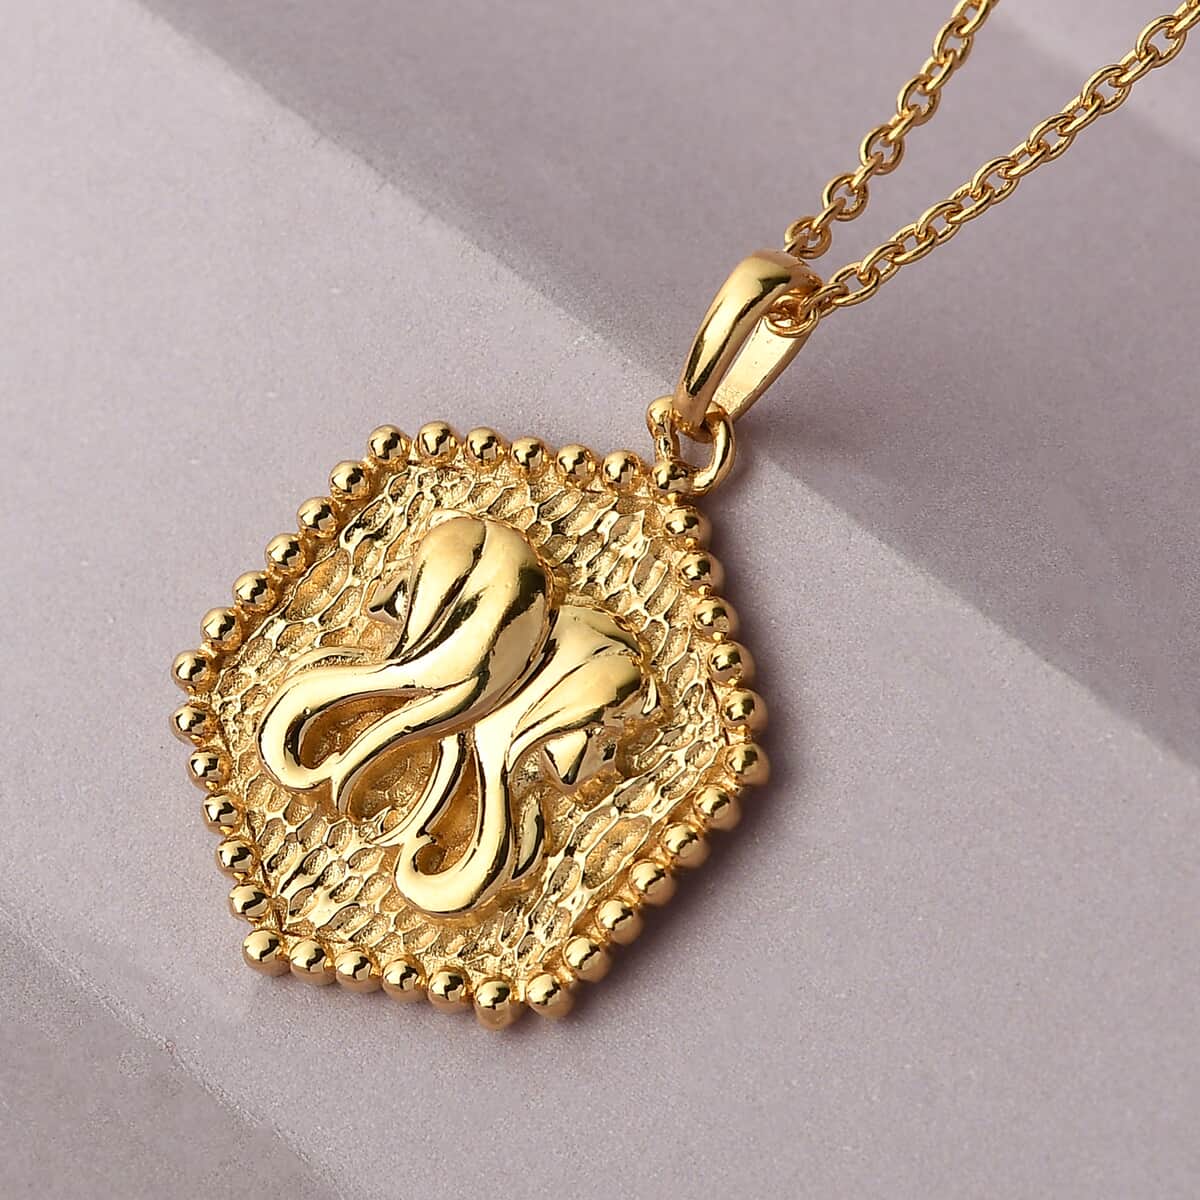 Karis Gemini Zodiac Pendant Necklace 20 Inches in 18K YG Plated and ION Plated Yellow Gold Stainless Steel image number 1